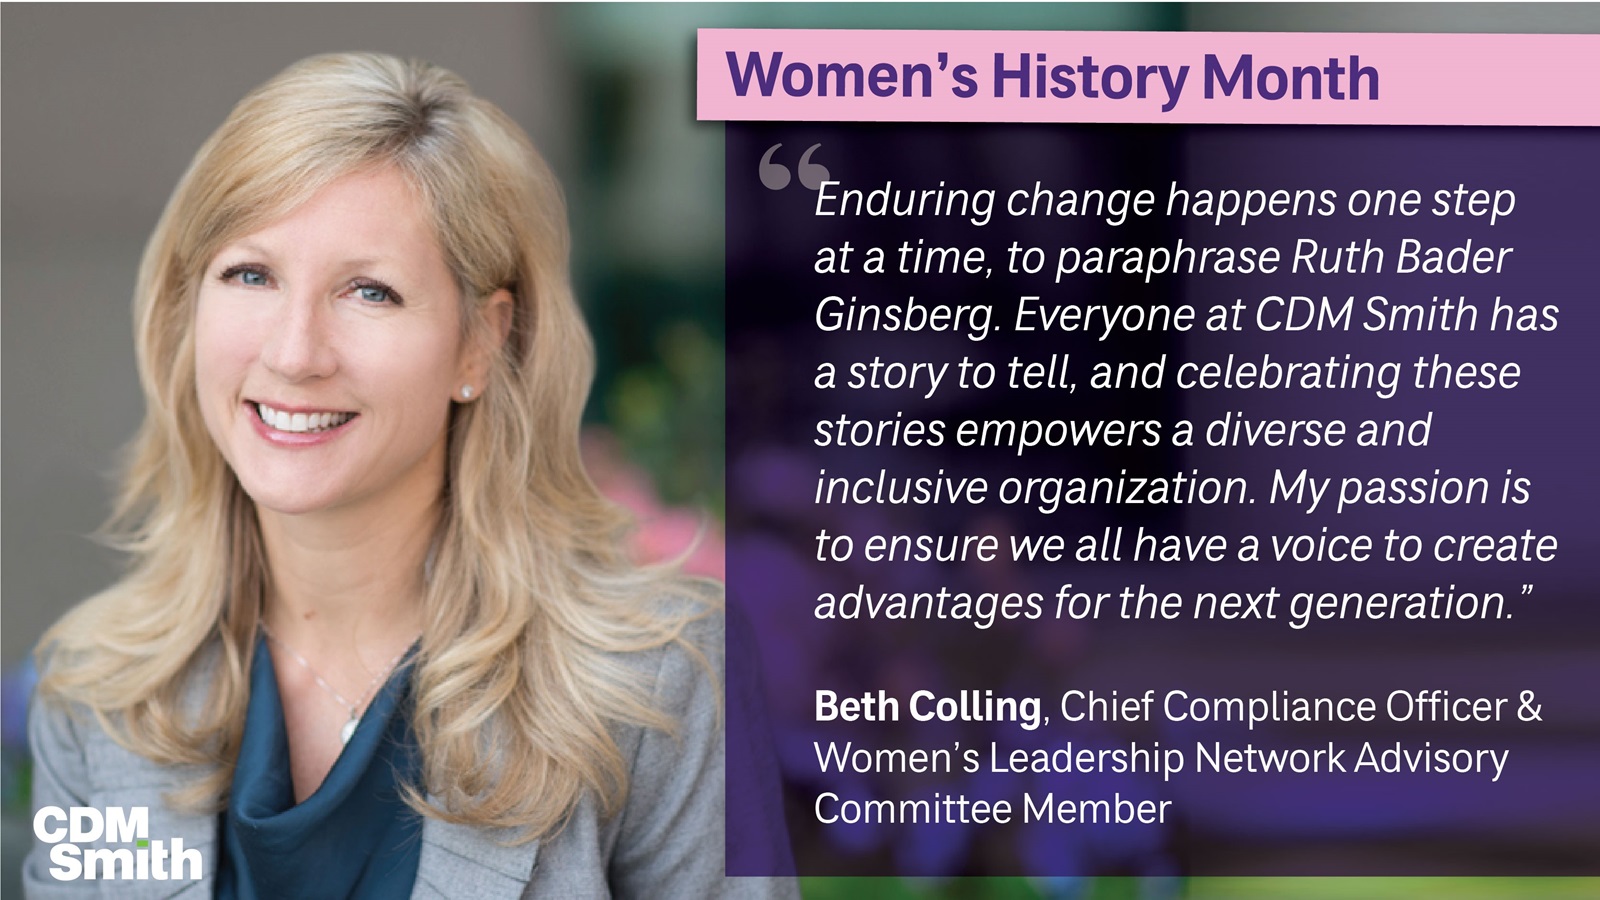 Quote by Beth Colling for Women's History Month